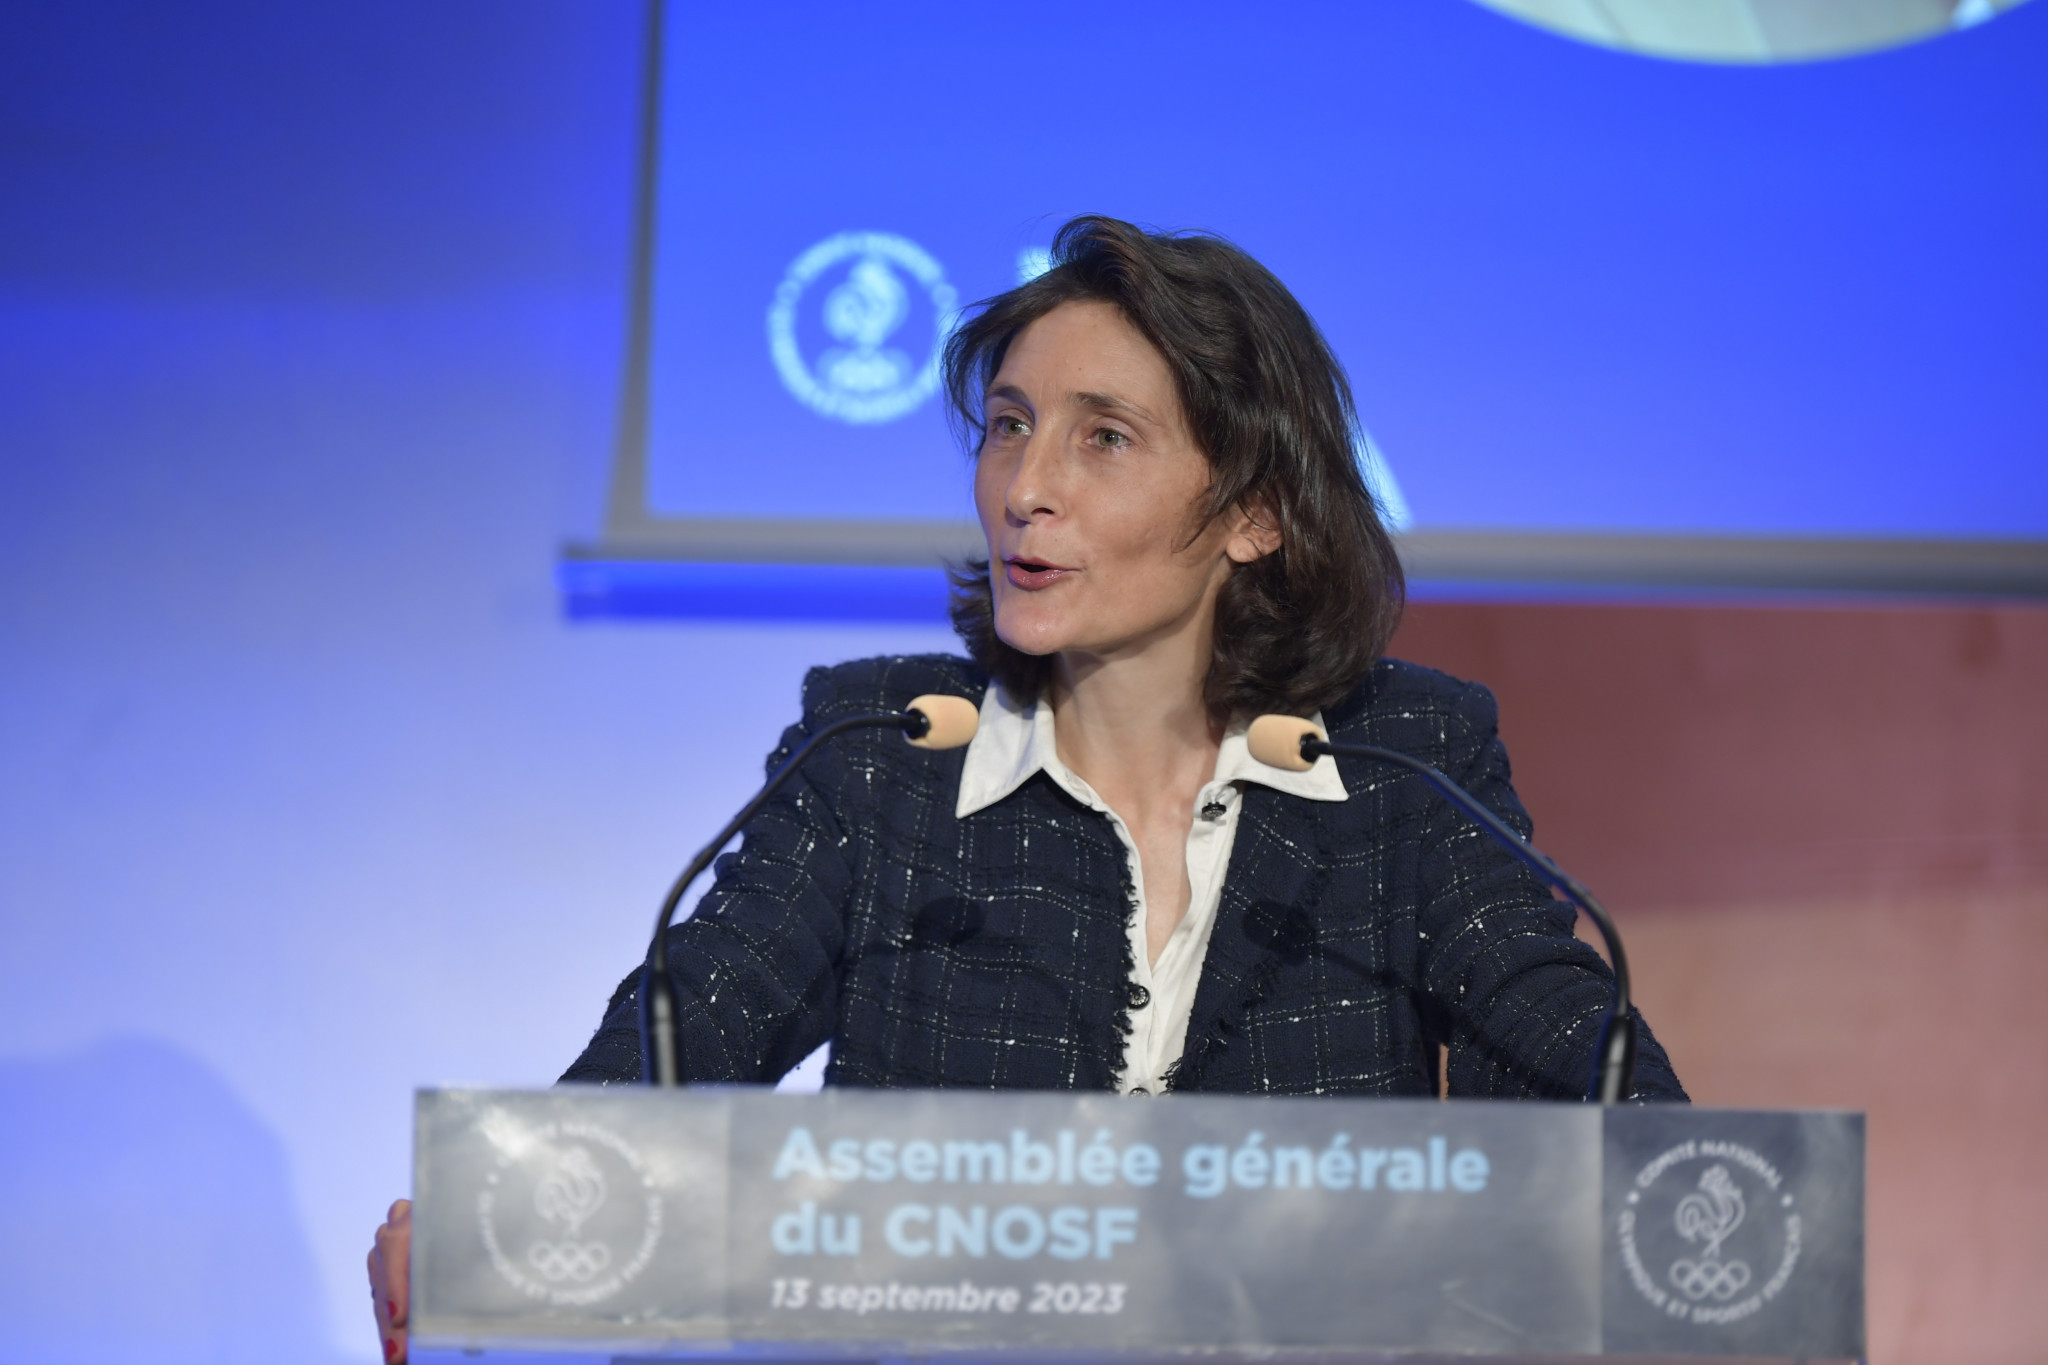 French Sports Minister Amélie Oudéa-Castéra has thrown her support behind the Winter Olympic bid which is forecast to cost approximately €1.5 billion ©CNOSF